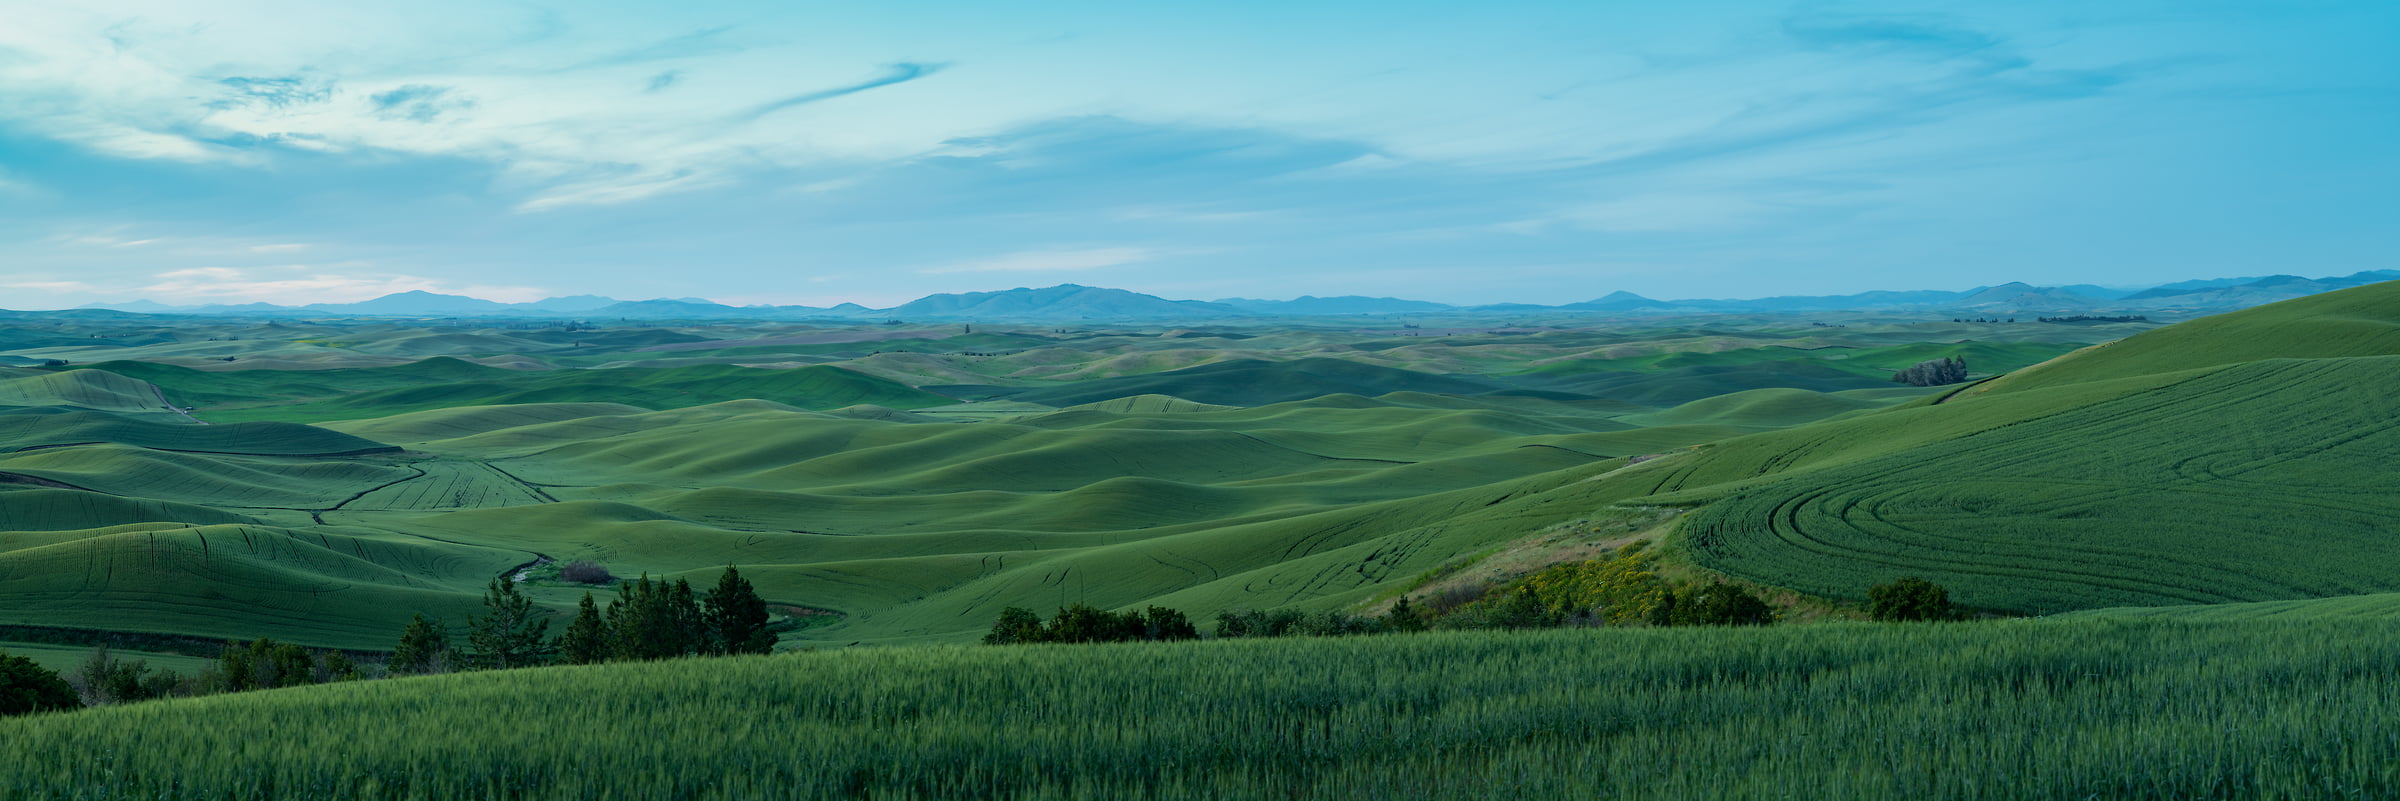 362 megapixels! A very high resolution, large-format VAST photo print of rolling hills at dusk; panorama landscape photograph created by Greg Probst in Steptoe Butte State Park, Washington